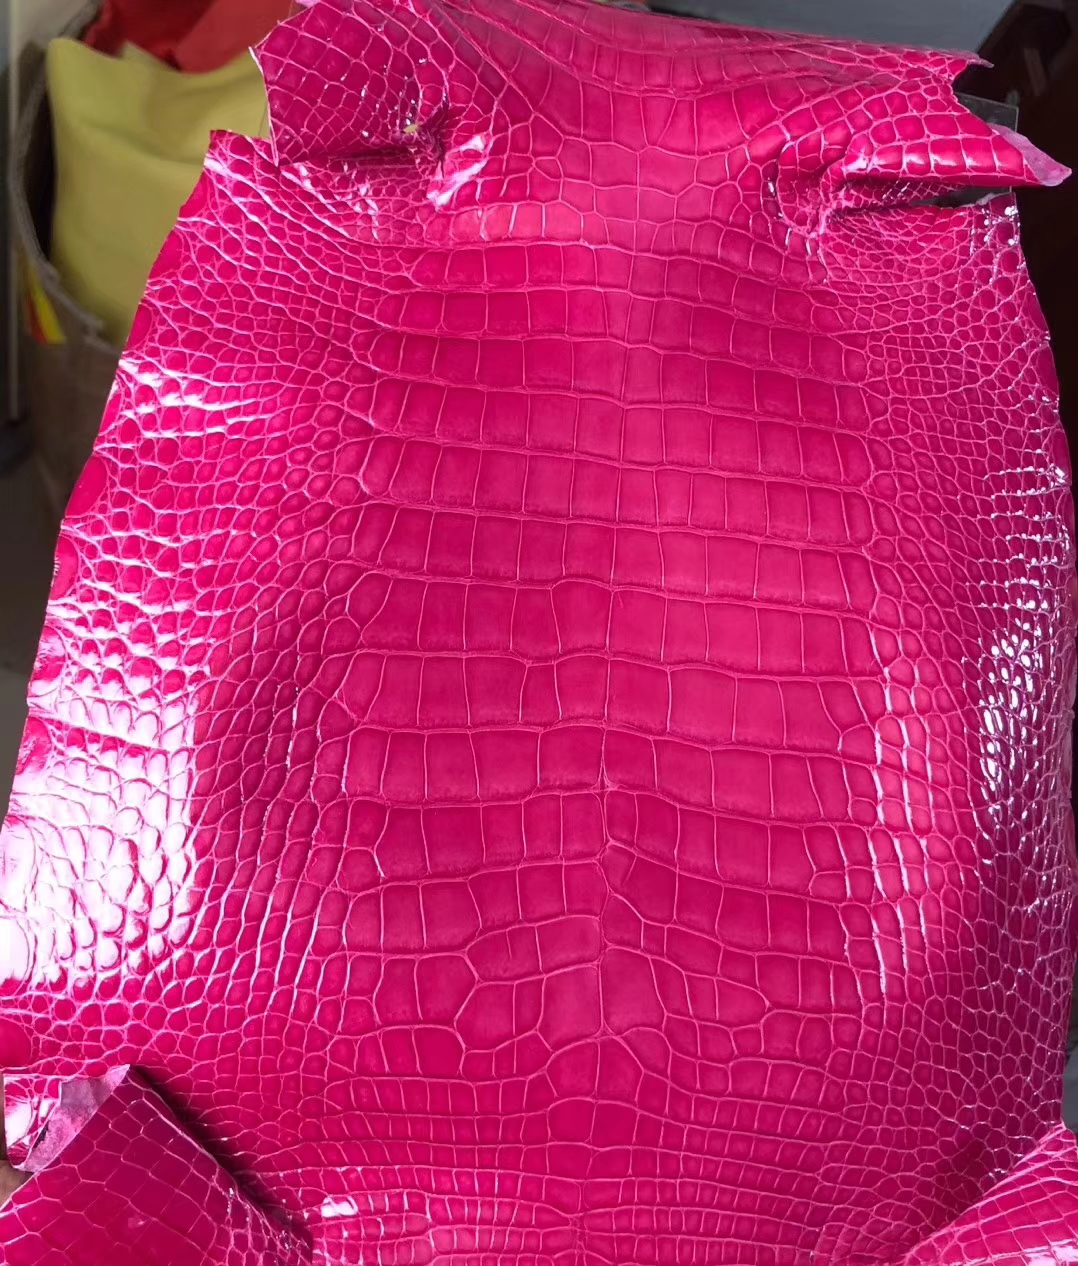 New Arrival Hermes 5J Hot Pink Alligator Shiny Crocodile Leather Minikelly Bags Order